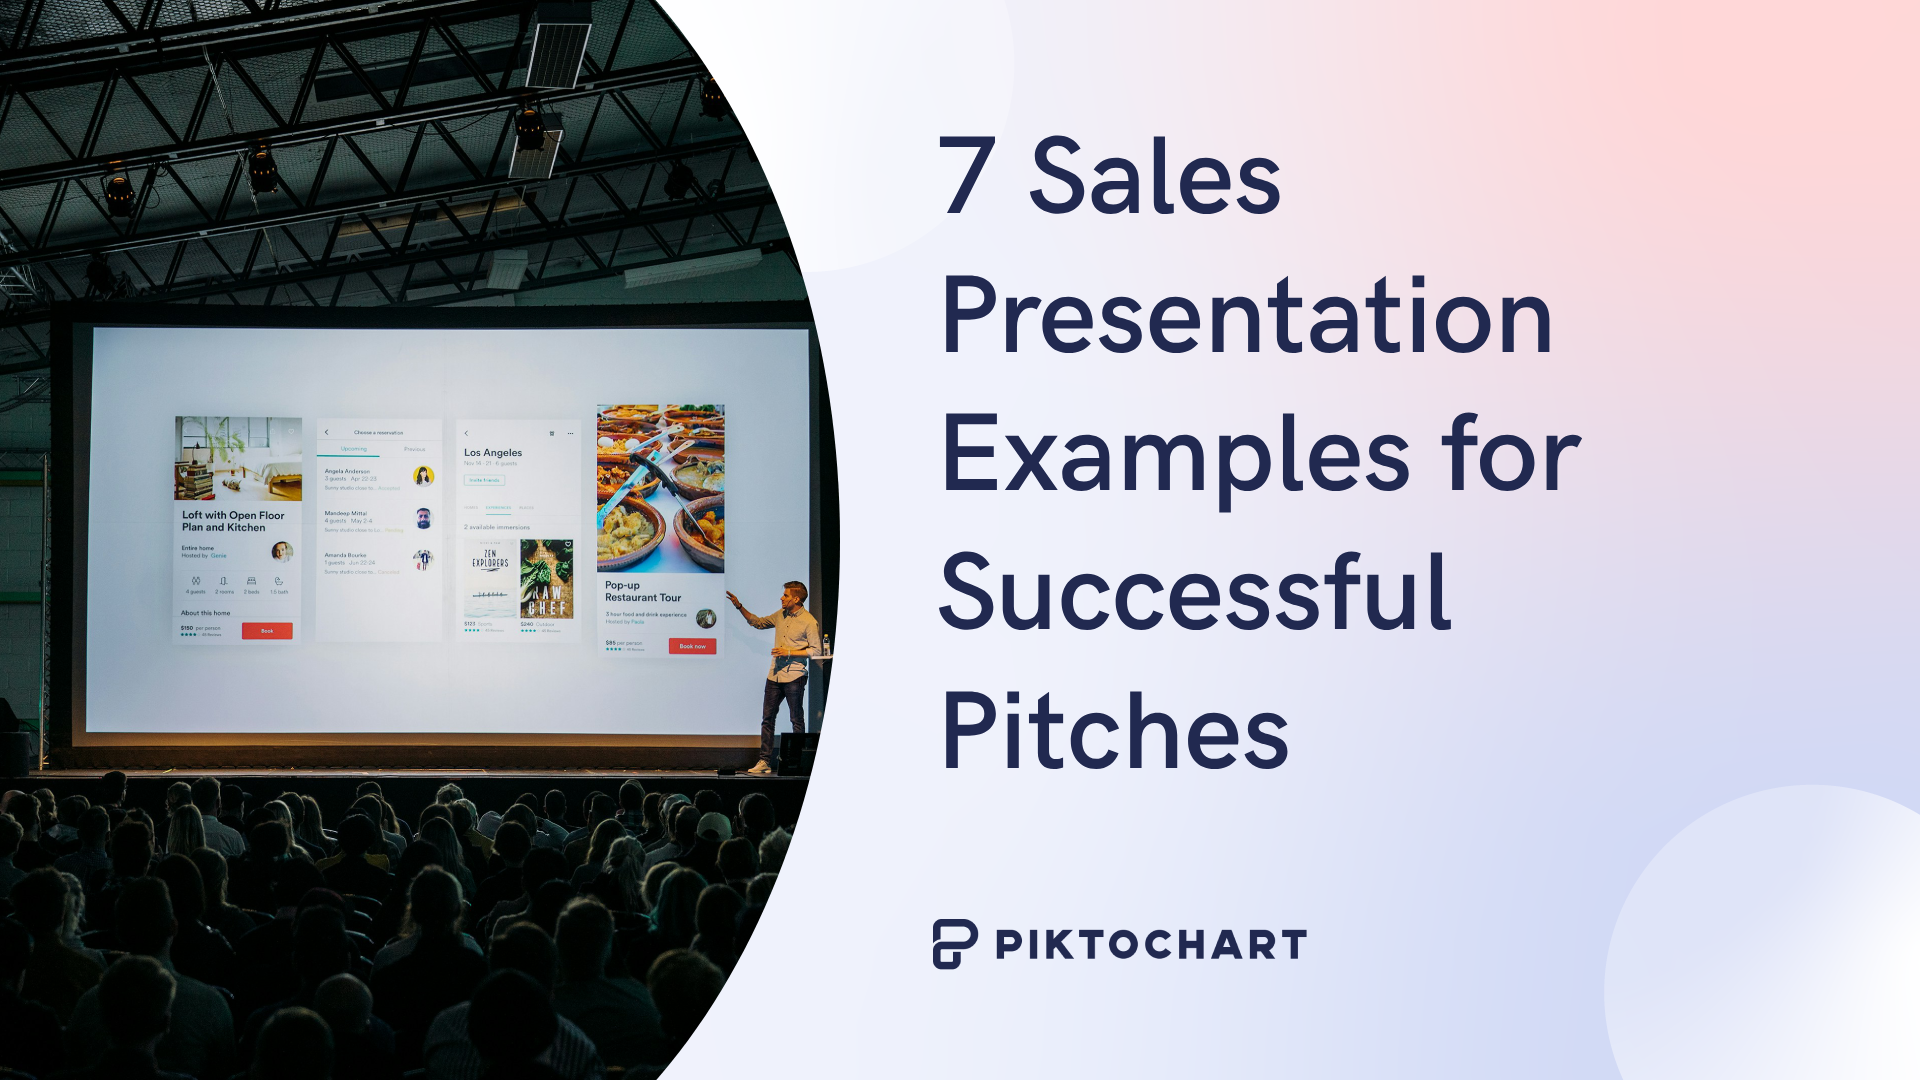 sales presentation is an example of